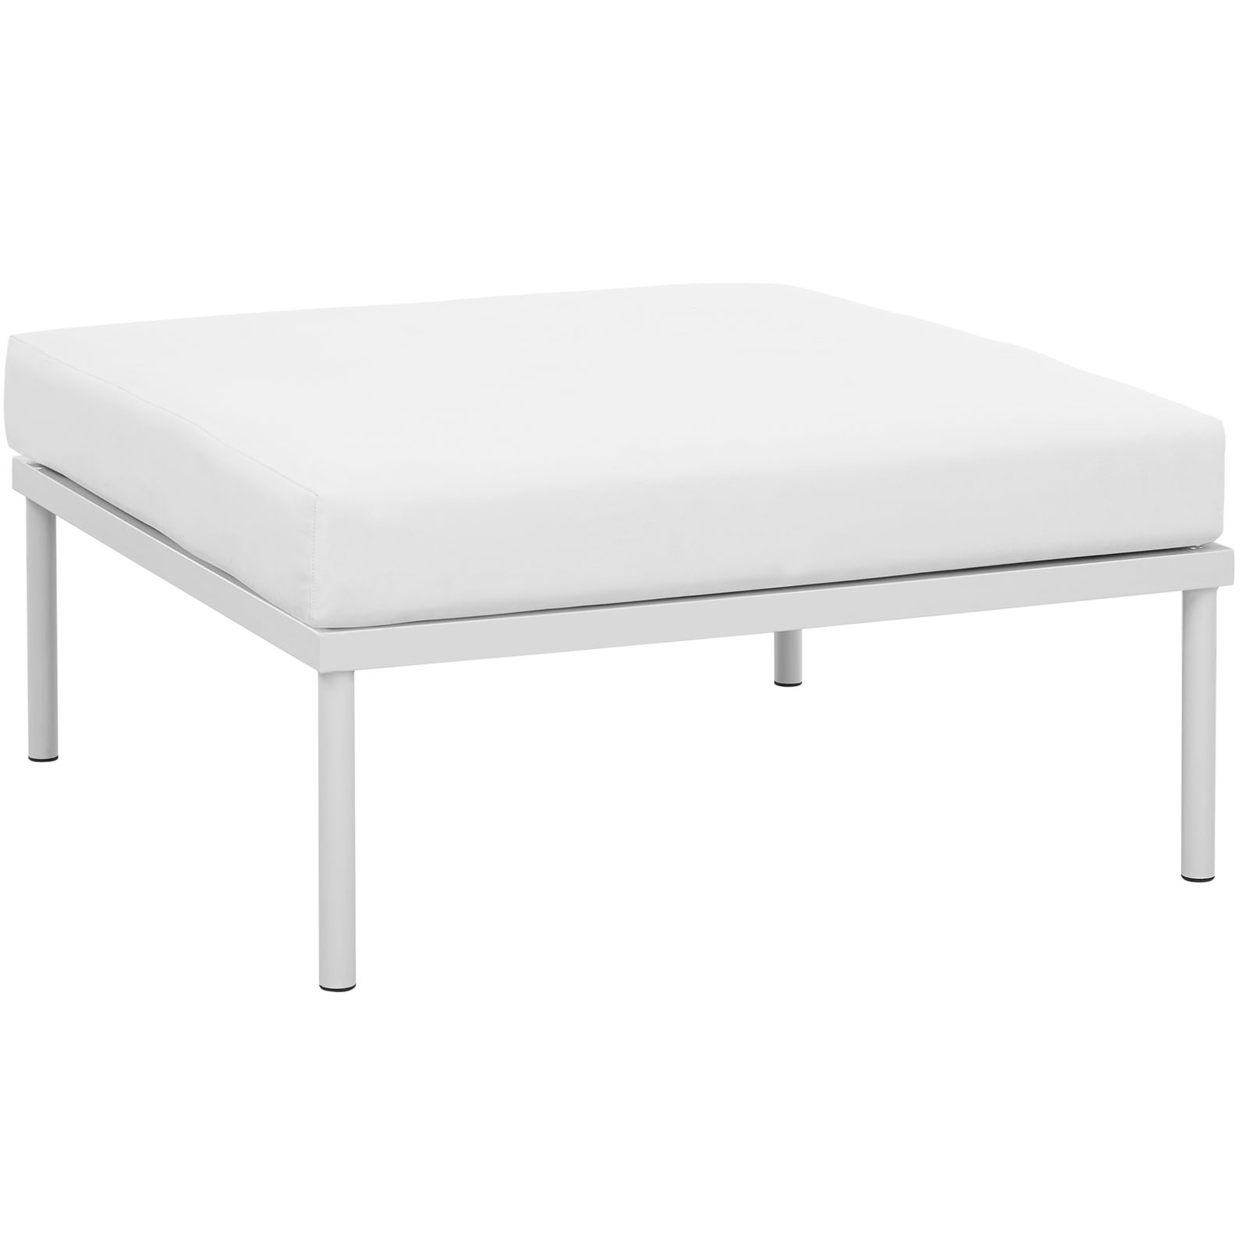 Modway Harmony Outdoor Patio Aluminum Fabric Ottoman in White/White - image 1 of 4